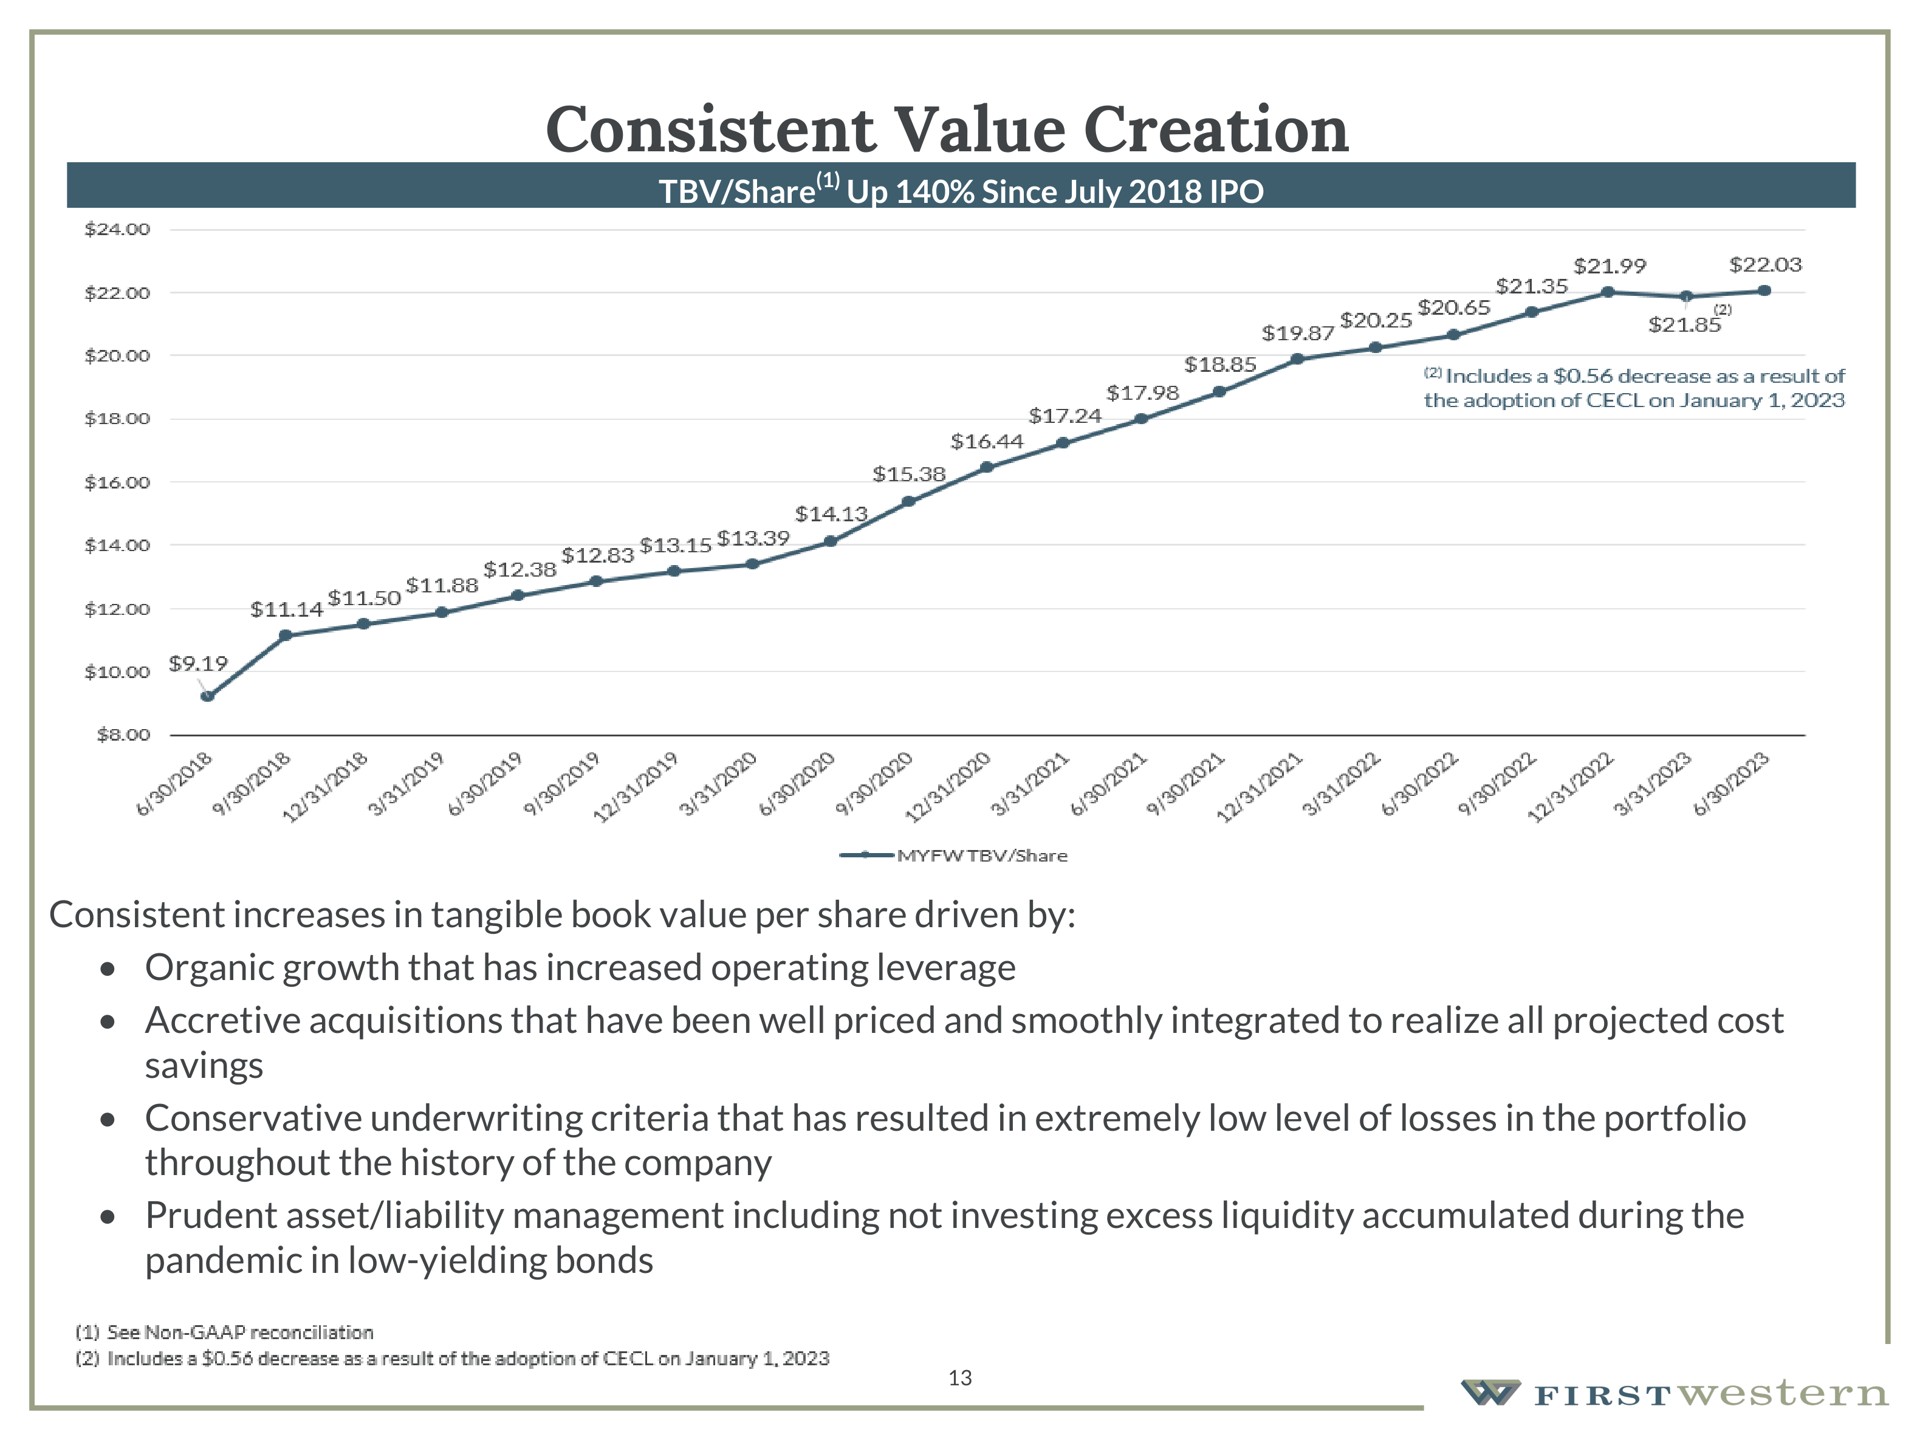 consistent value creation share up since consistent increases in tangible book value per share driven by organic growth that has increased operating leverage accretive acquisitions that have been well priced and smoothly integrated to realize all projected cost savings conservative underwriting criteria that has resulted in extremely low level of losses in the portfolio throughout the history of the company prudent asset liability management including not investing excess liquidity accumulated during the pandemic in low yielding bonds | First Western Financial